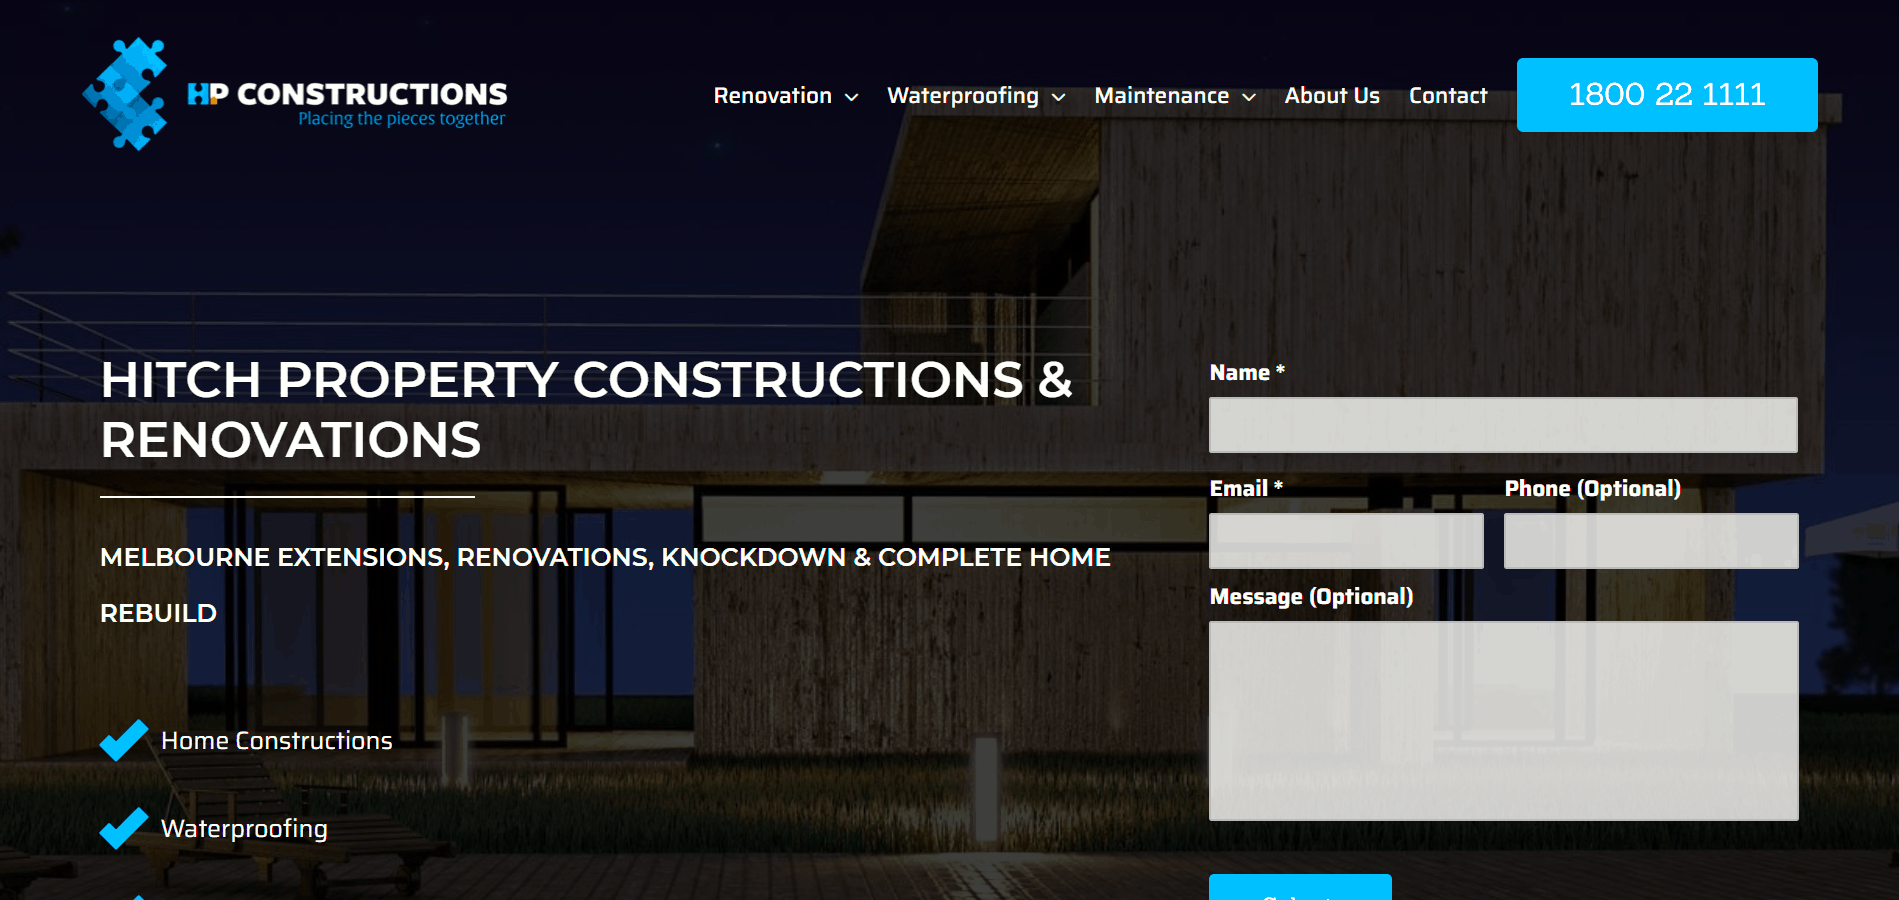 Hitch Property Constructions